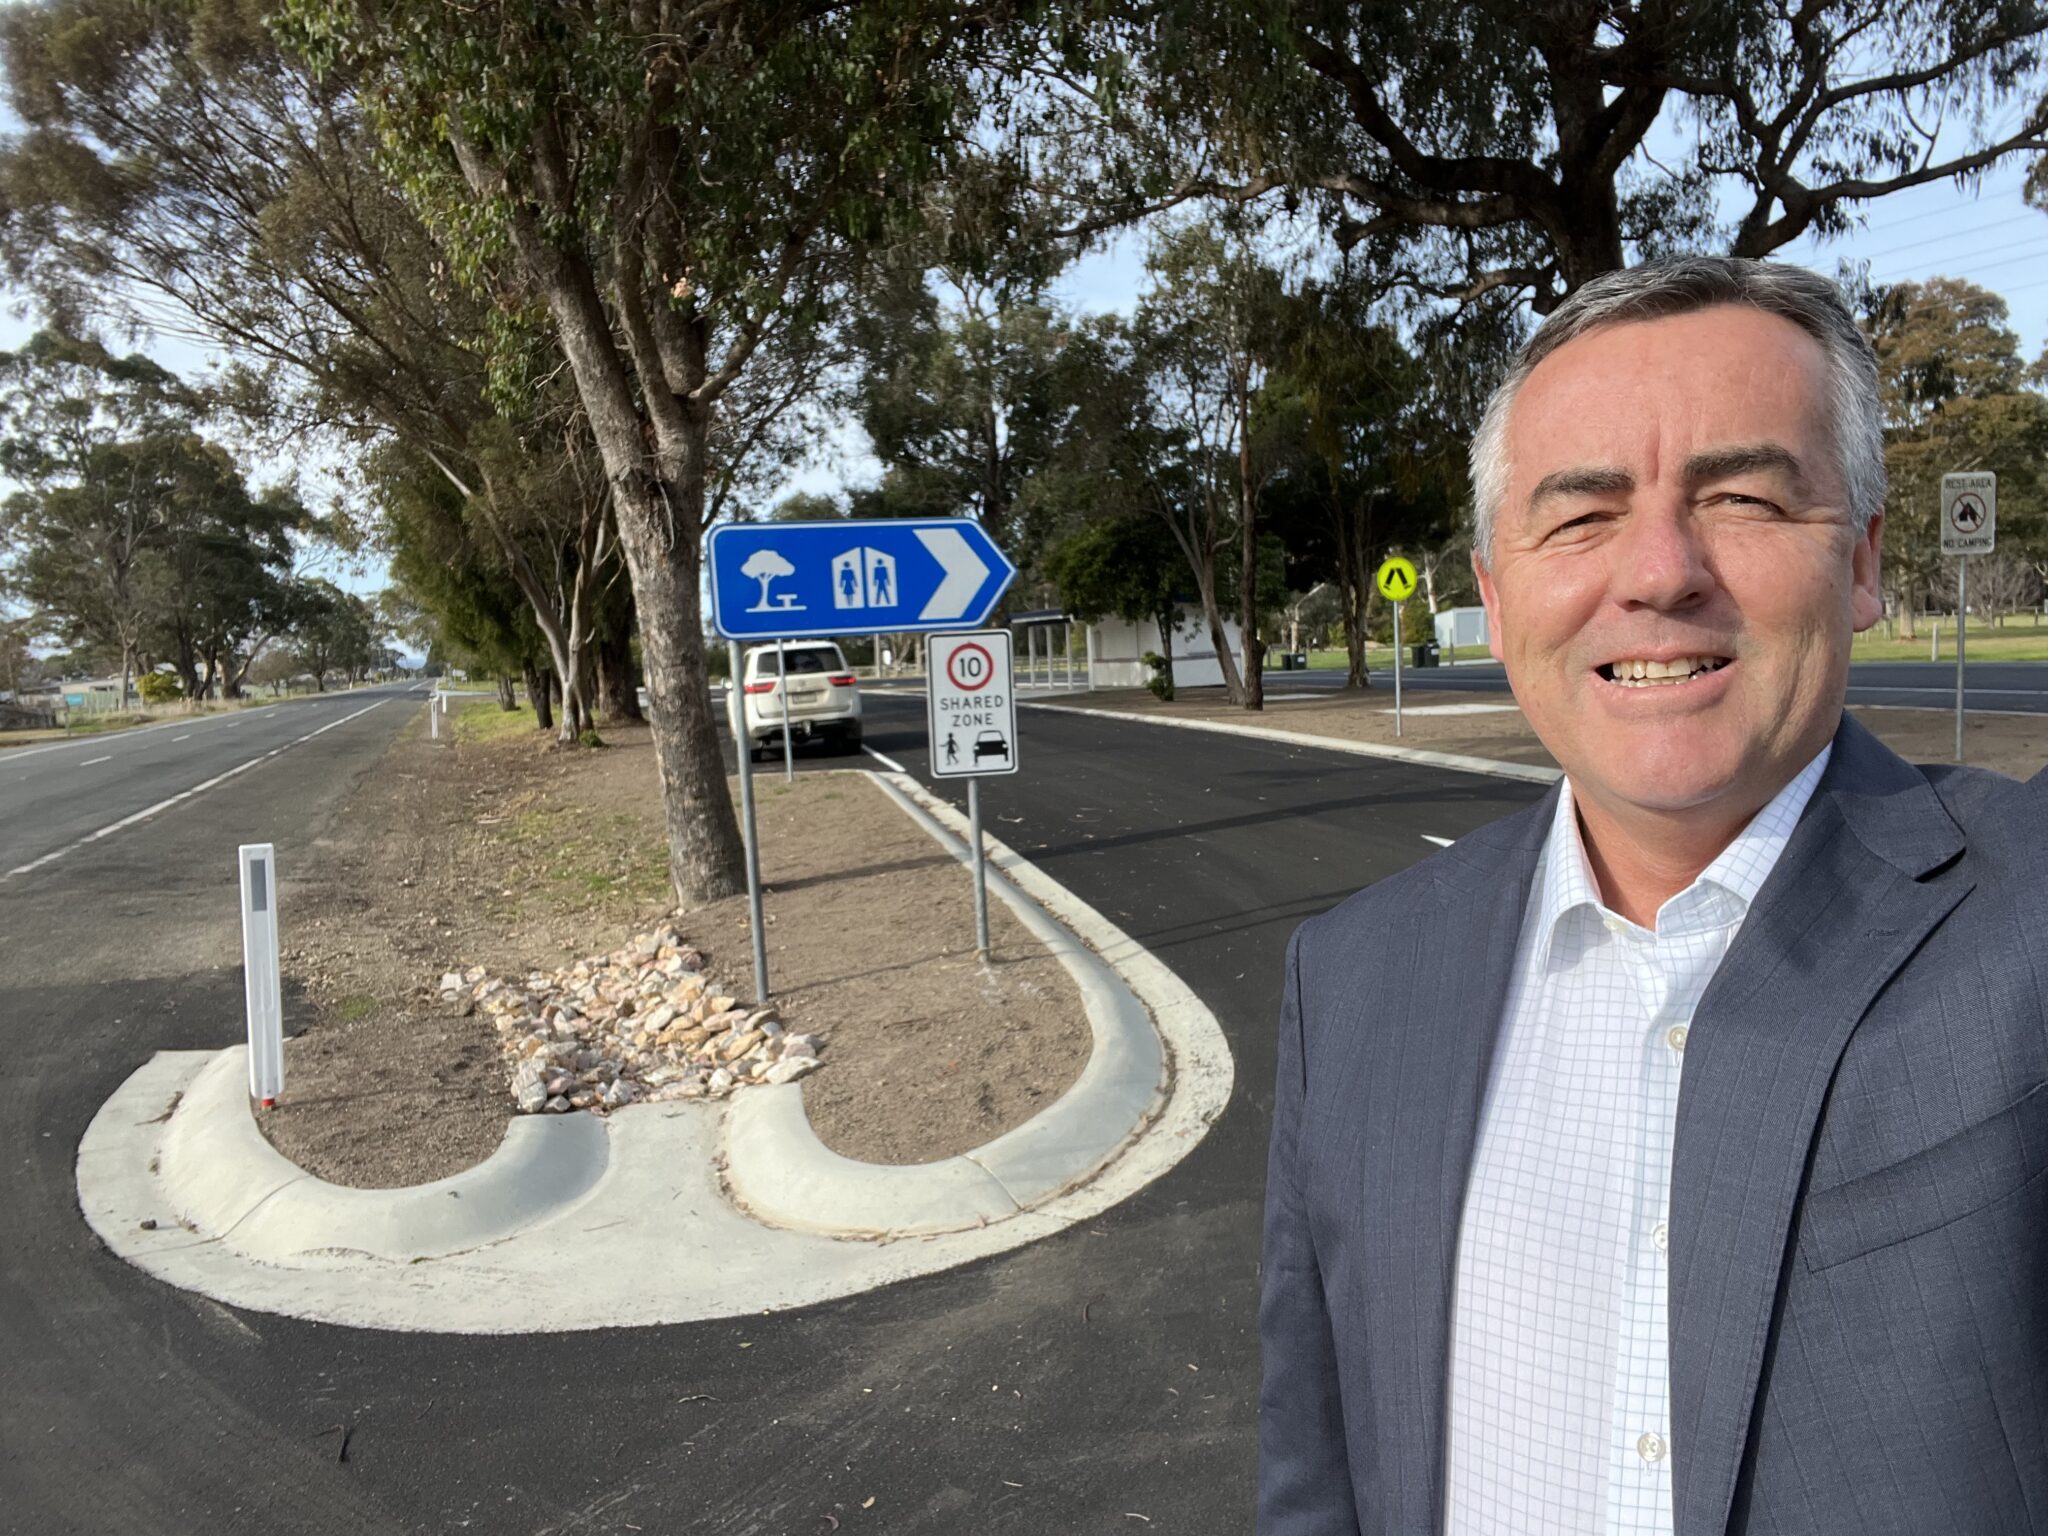 REDEVELOPED NEWMERELLA REST AREA WILL HELP SAVE LIVES ON THE ROAD